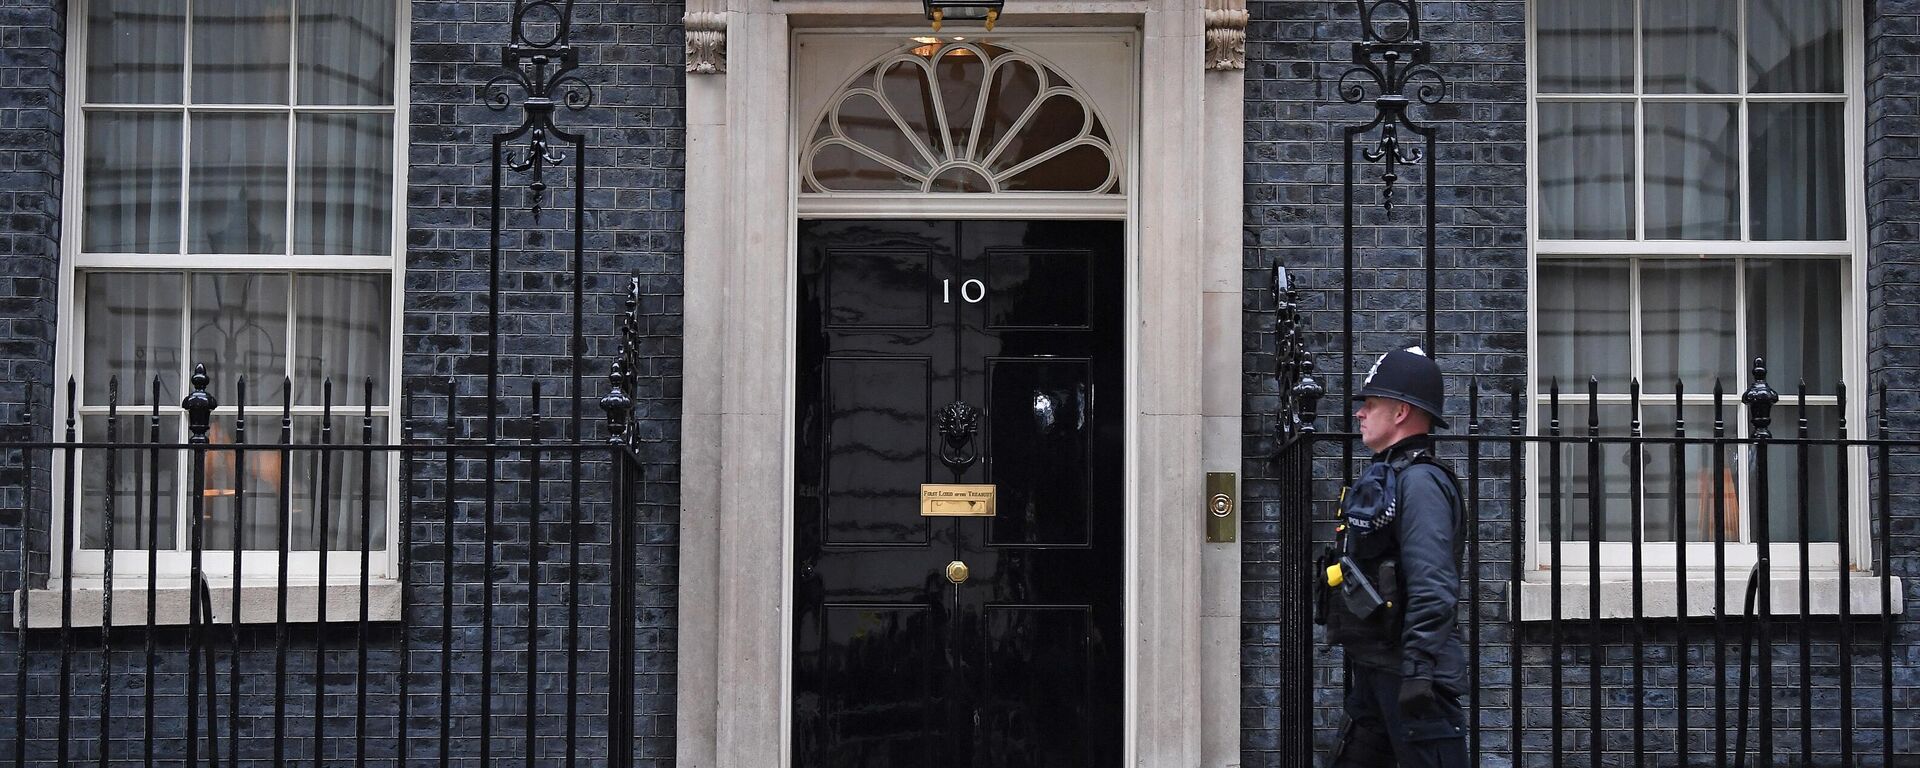 A police officer walks past the door to 10 Downing Street, the official residence of Britain's Prime Minister, in London on January 25, 2022 - Sputnik International, 1920, 20.02.2022